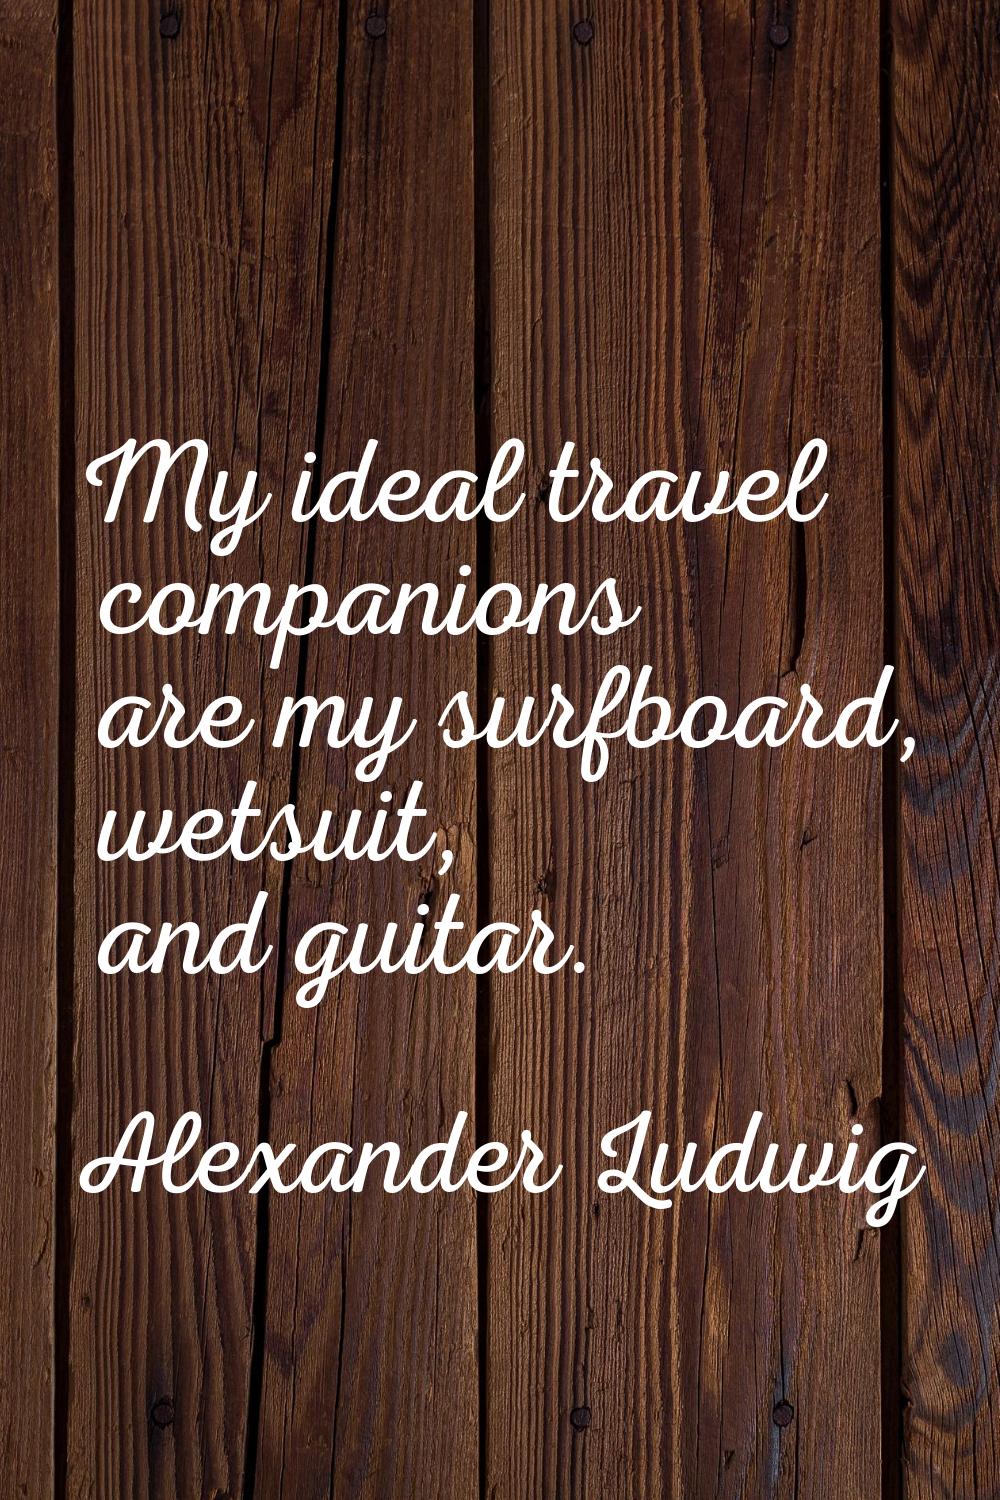 My ideal travel companions are my surfboard, wetsuit, and guitar.